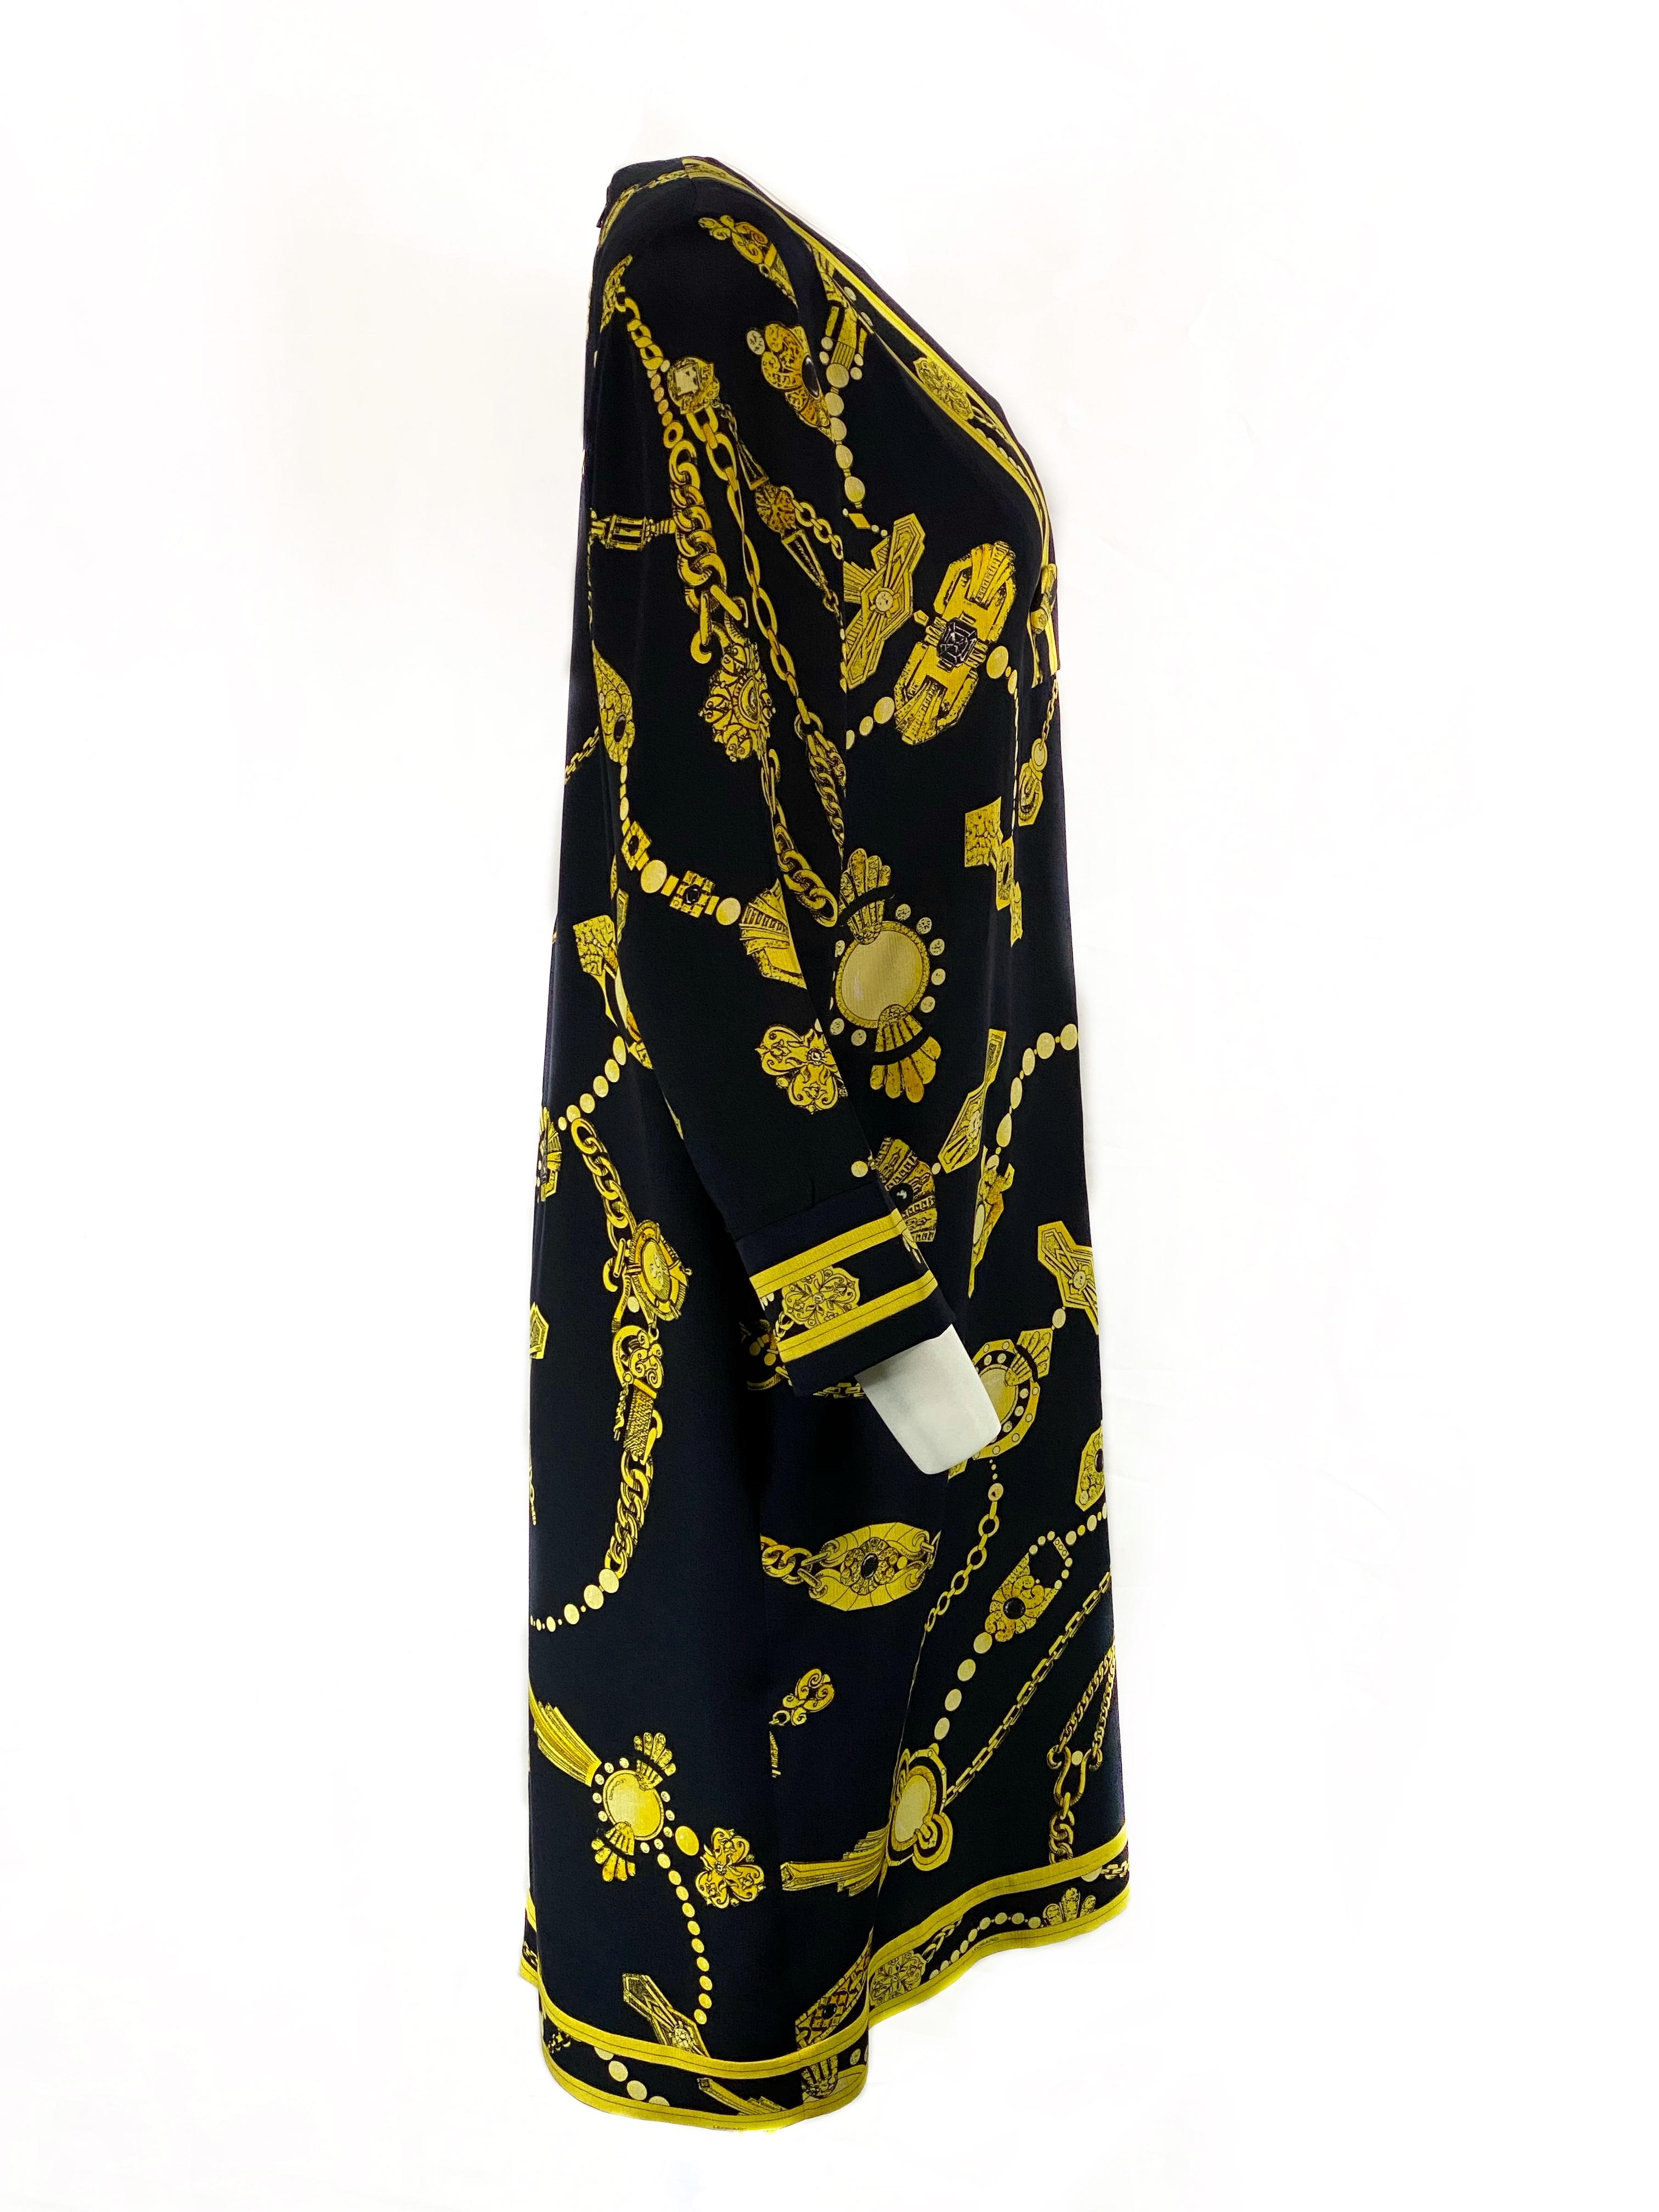 Vintage LEONARD Black and Yellow V- Neck Mini Dress 

Product details:
100% Silk
Black with yellow chain print and LEONARD stamps
V- neck, measures 9 inches long with 3 large buttons detail, the diameter is 1.5 inches each 
One pocket on each side